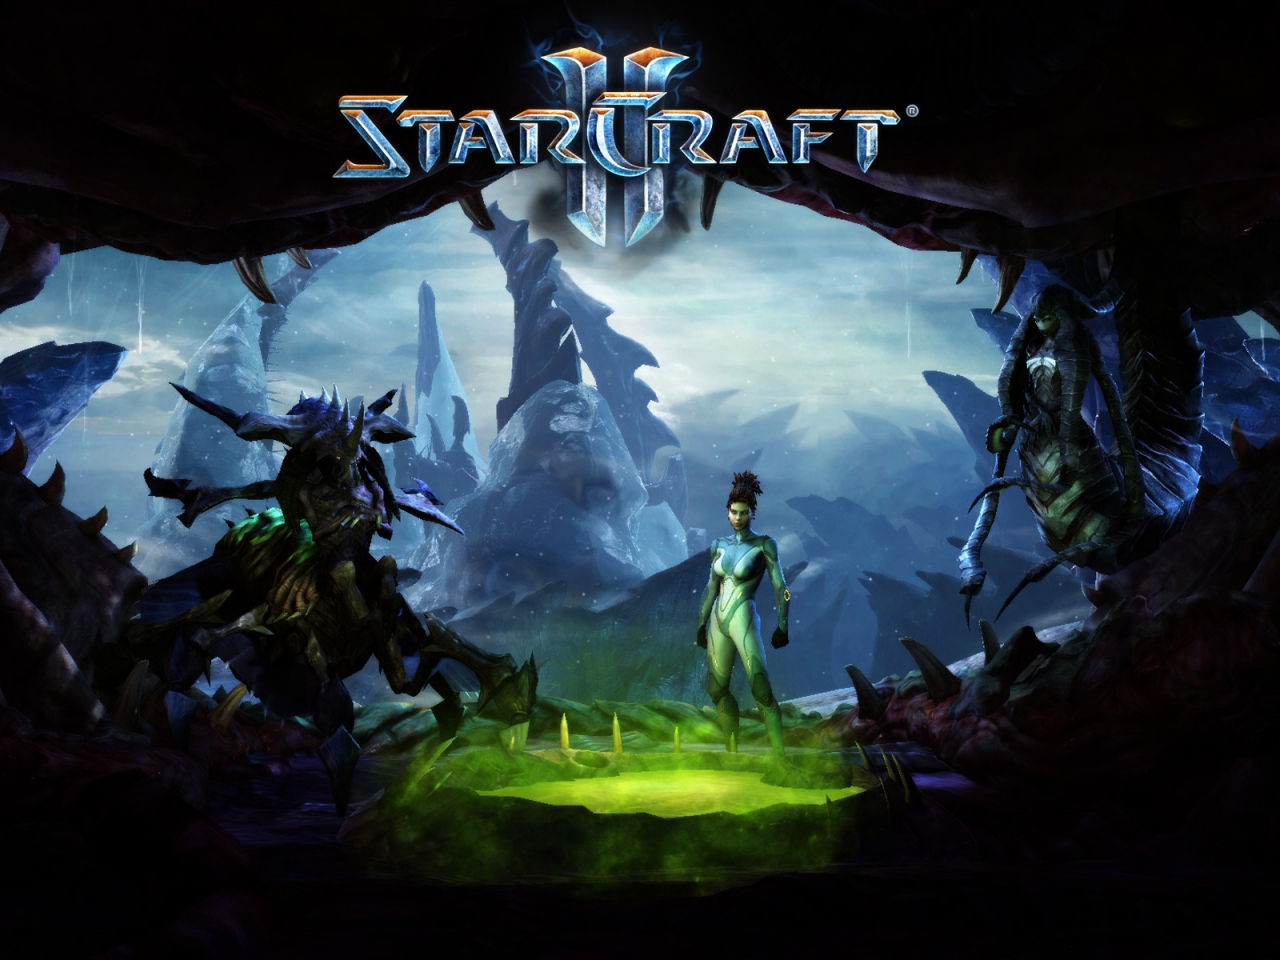 Starcraft II Heart of the Swarm for 1280 x 960 resolution